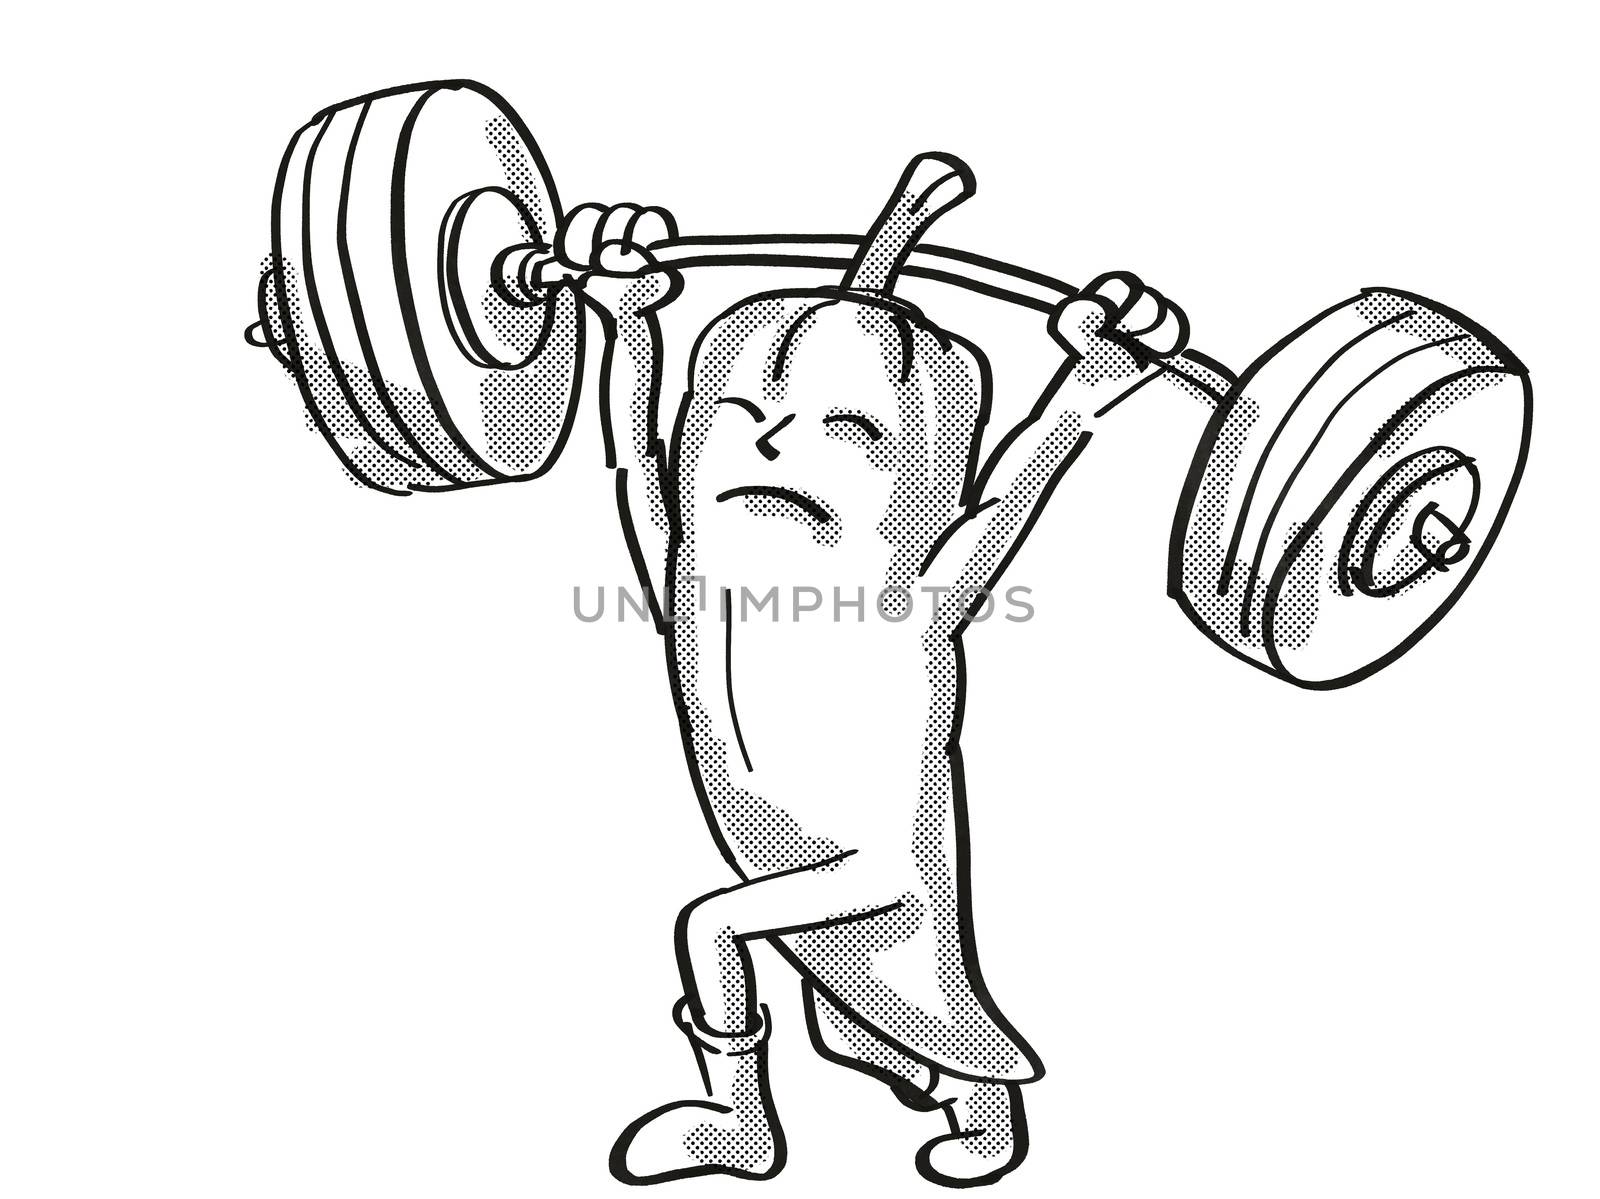 Retro cartoon style drawing of a Red Chili Pepper, a healthy vegetable lifting a barbell on isolated white background done in black and white